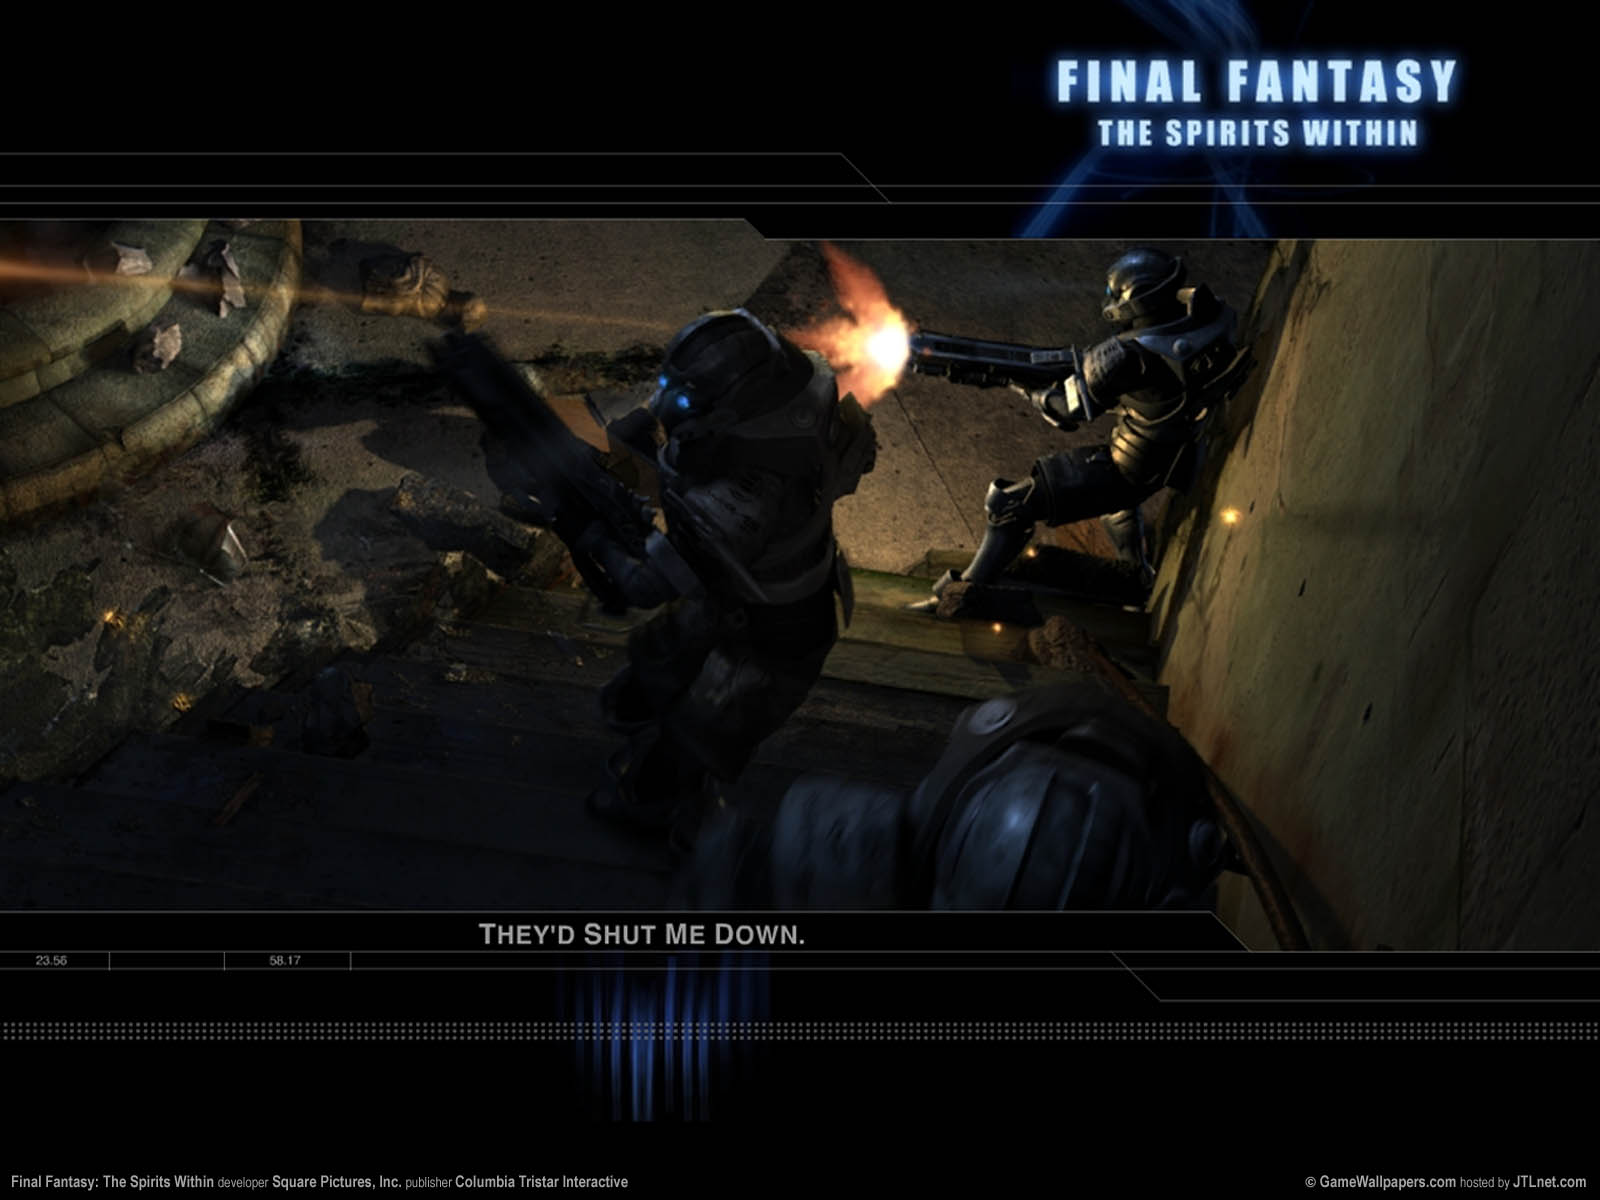 Final Fantasy%253A The Spirits Within wallpaper 07 1600x1200